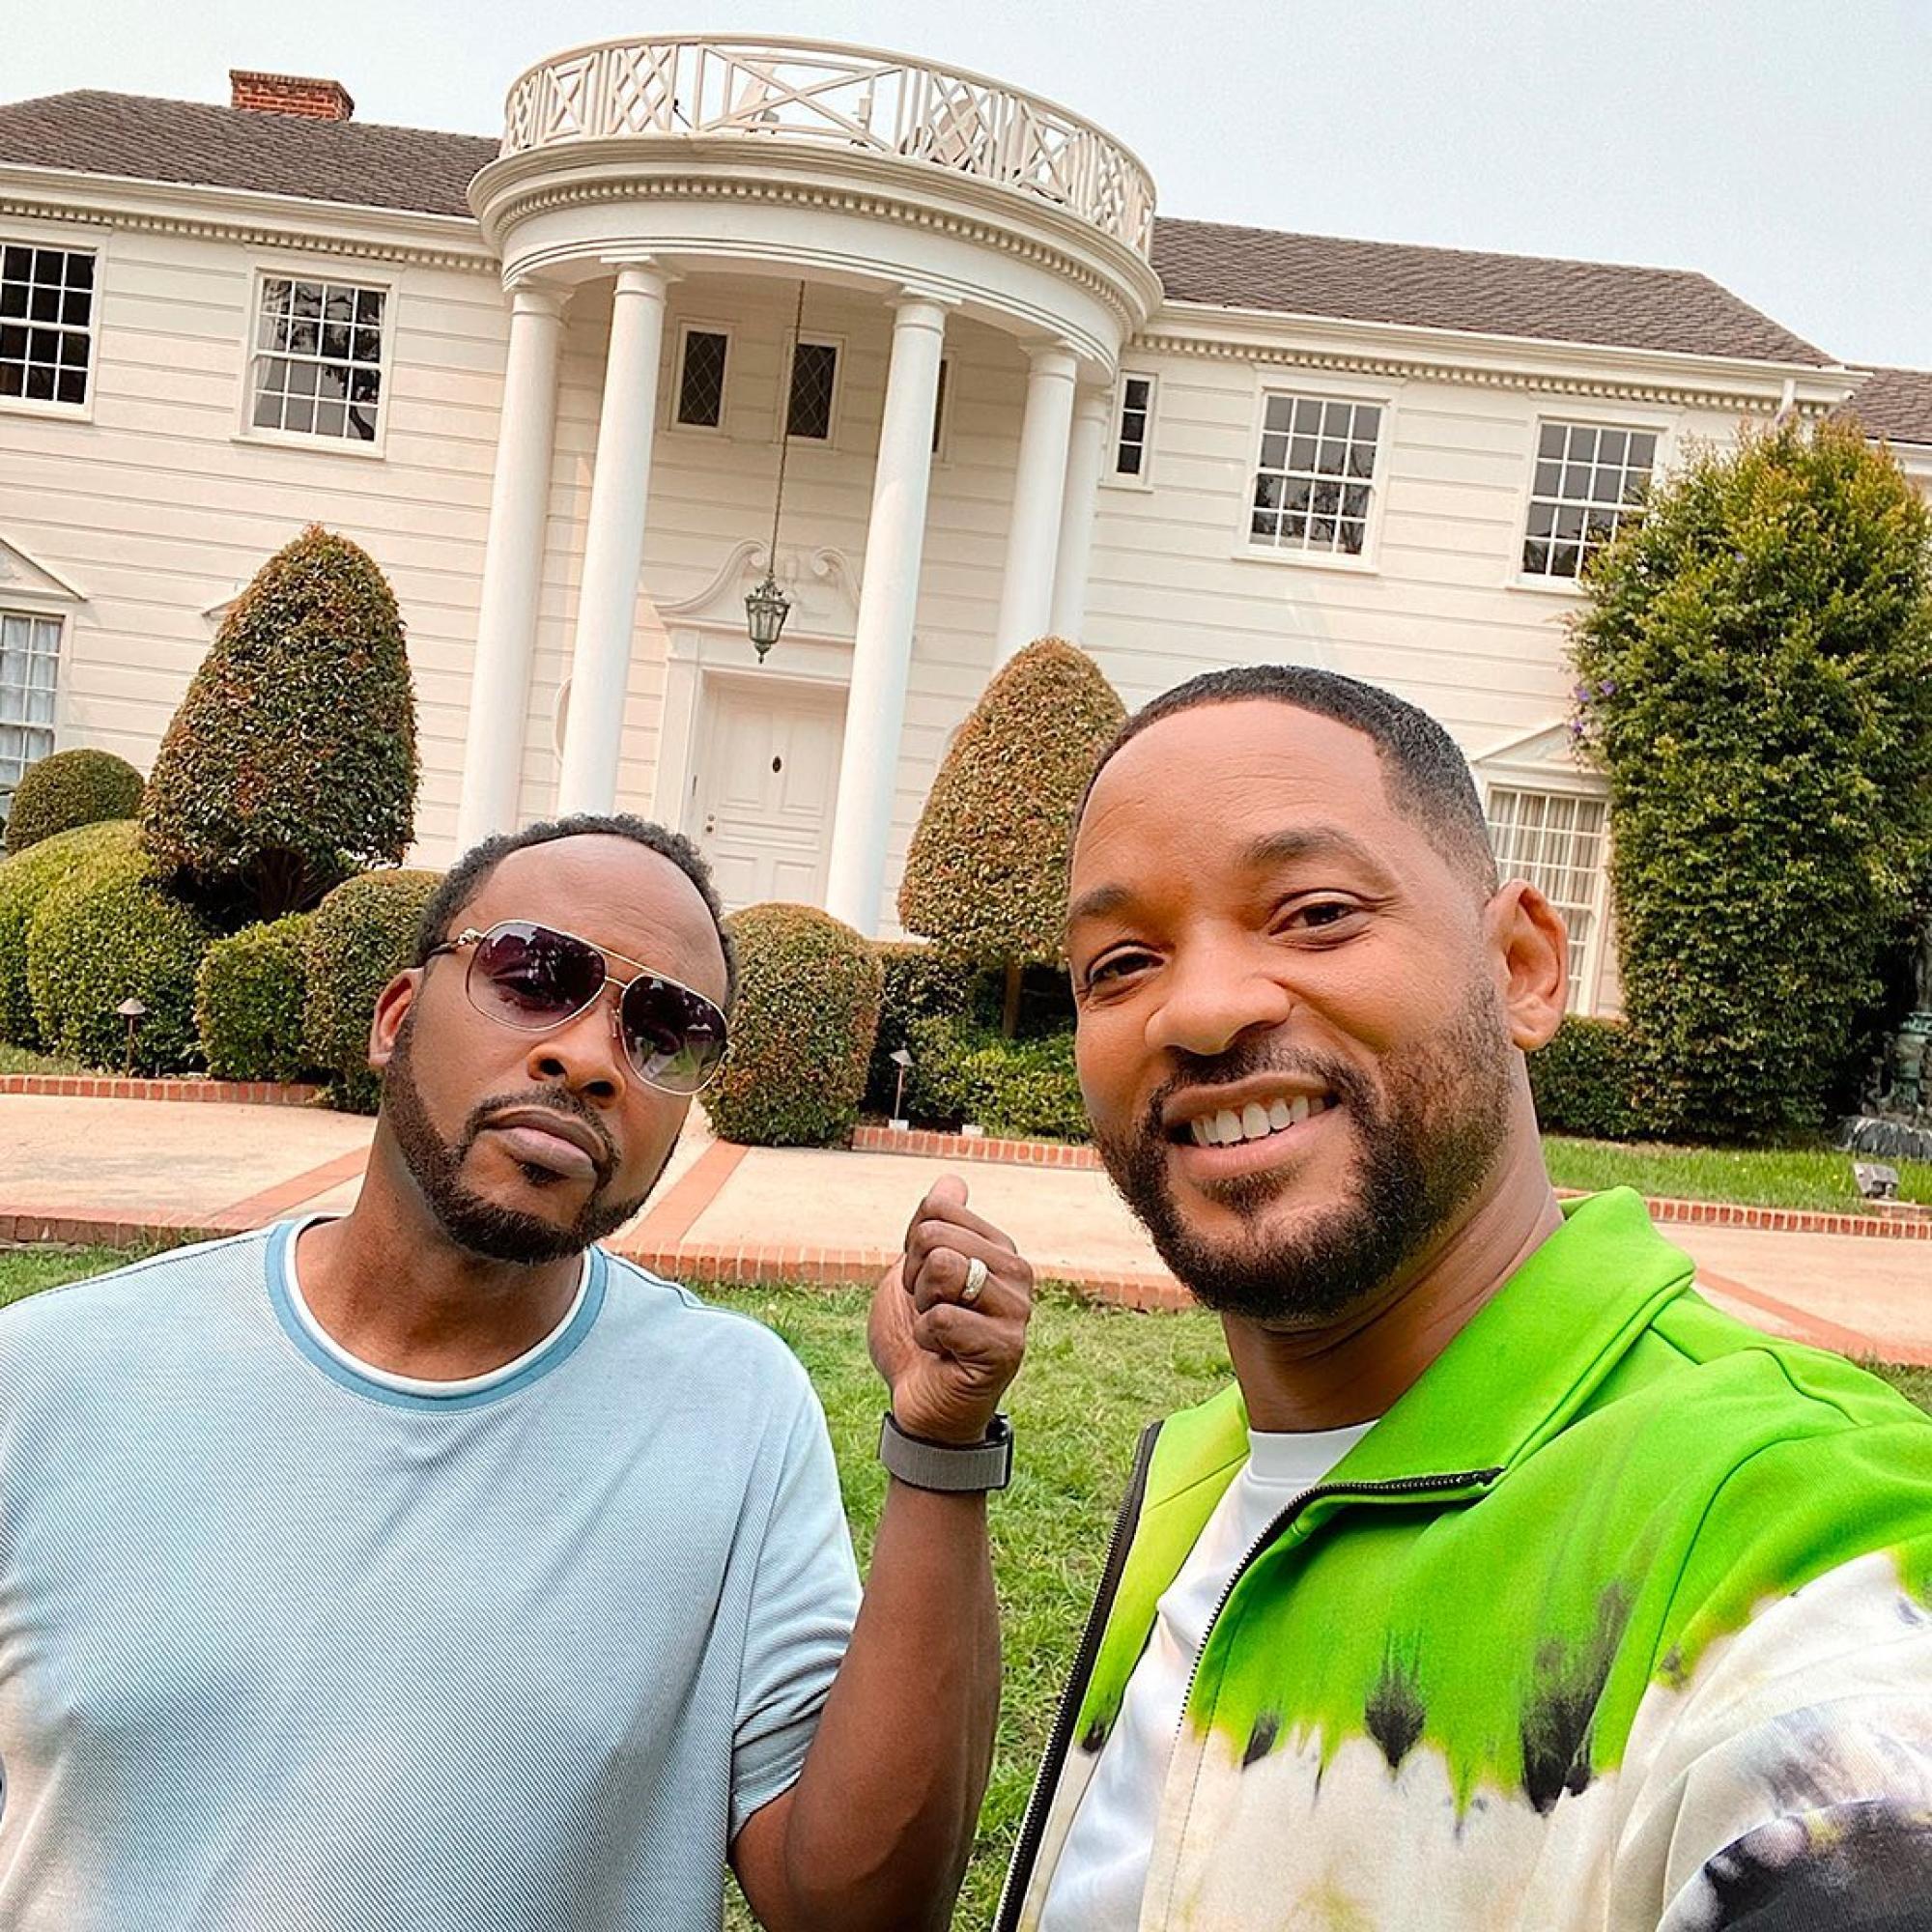 DJ Jazzy Jeff and Will Smith visiting the original house featured in The Fresh Prince of Bel-Air. Photo: @freshprince/Instagram